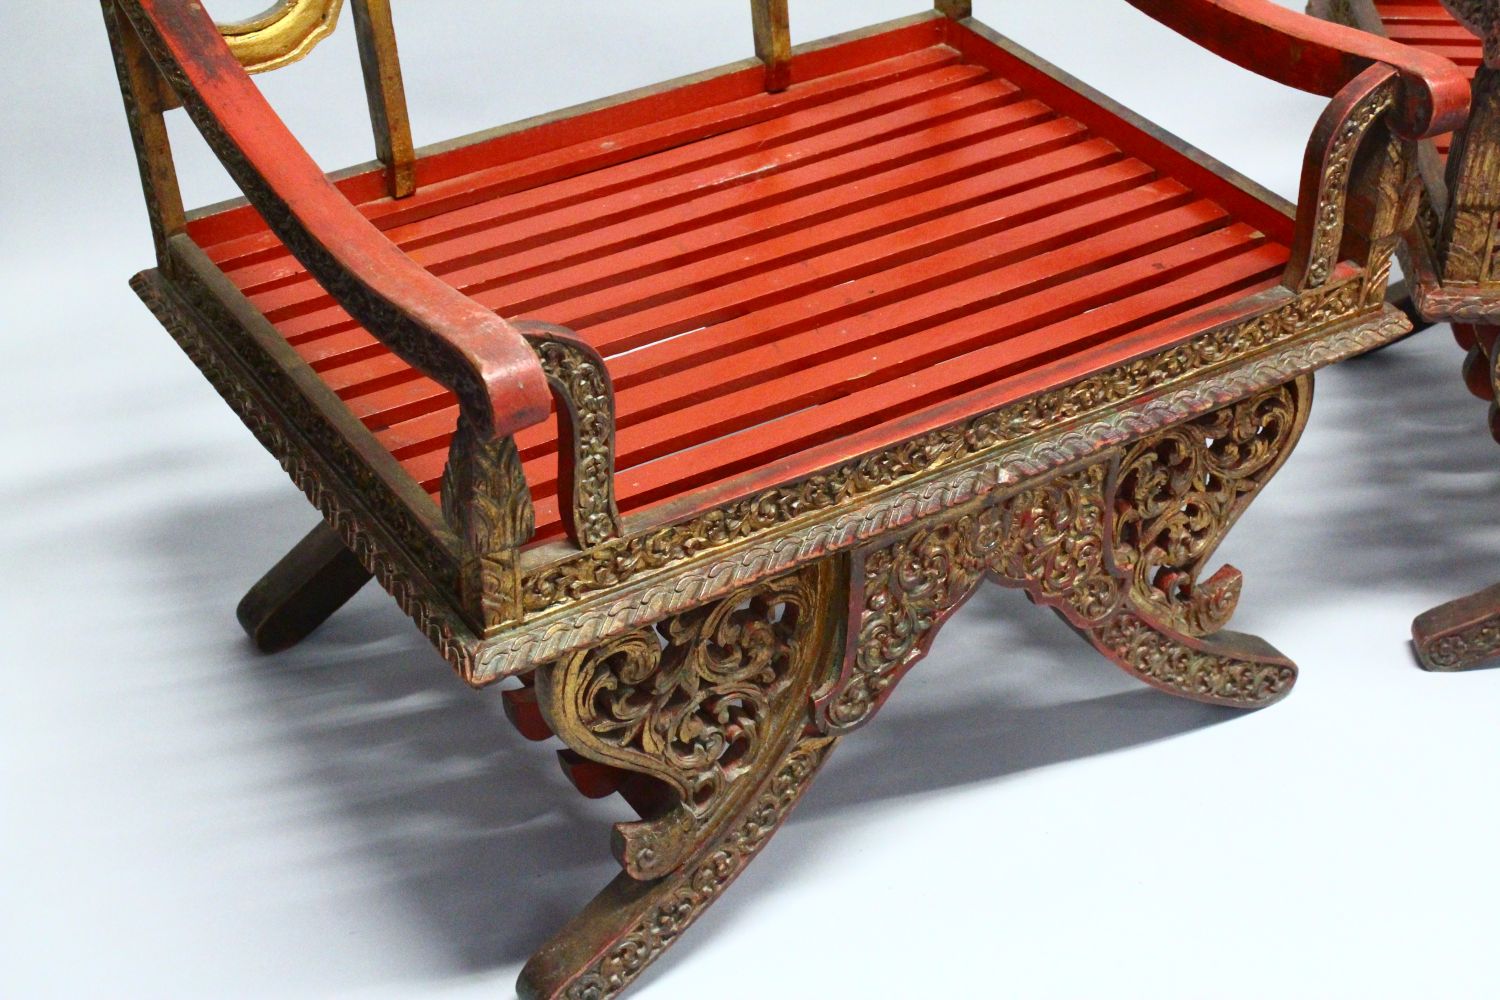 A PAIR OF 19TH/20TH CENTURY THAI CARVED HOWDAH ELEPHANT CHAIRS, profusely carved and pierced with - Image 2 of 10